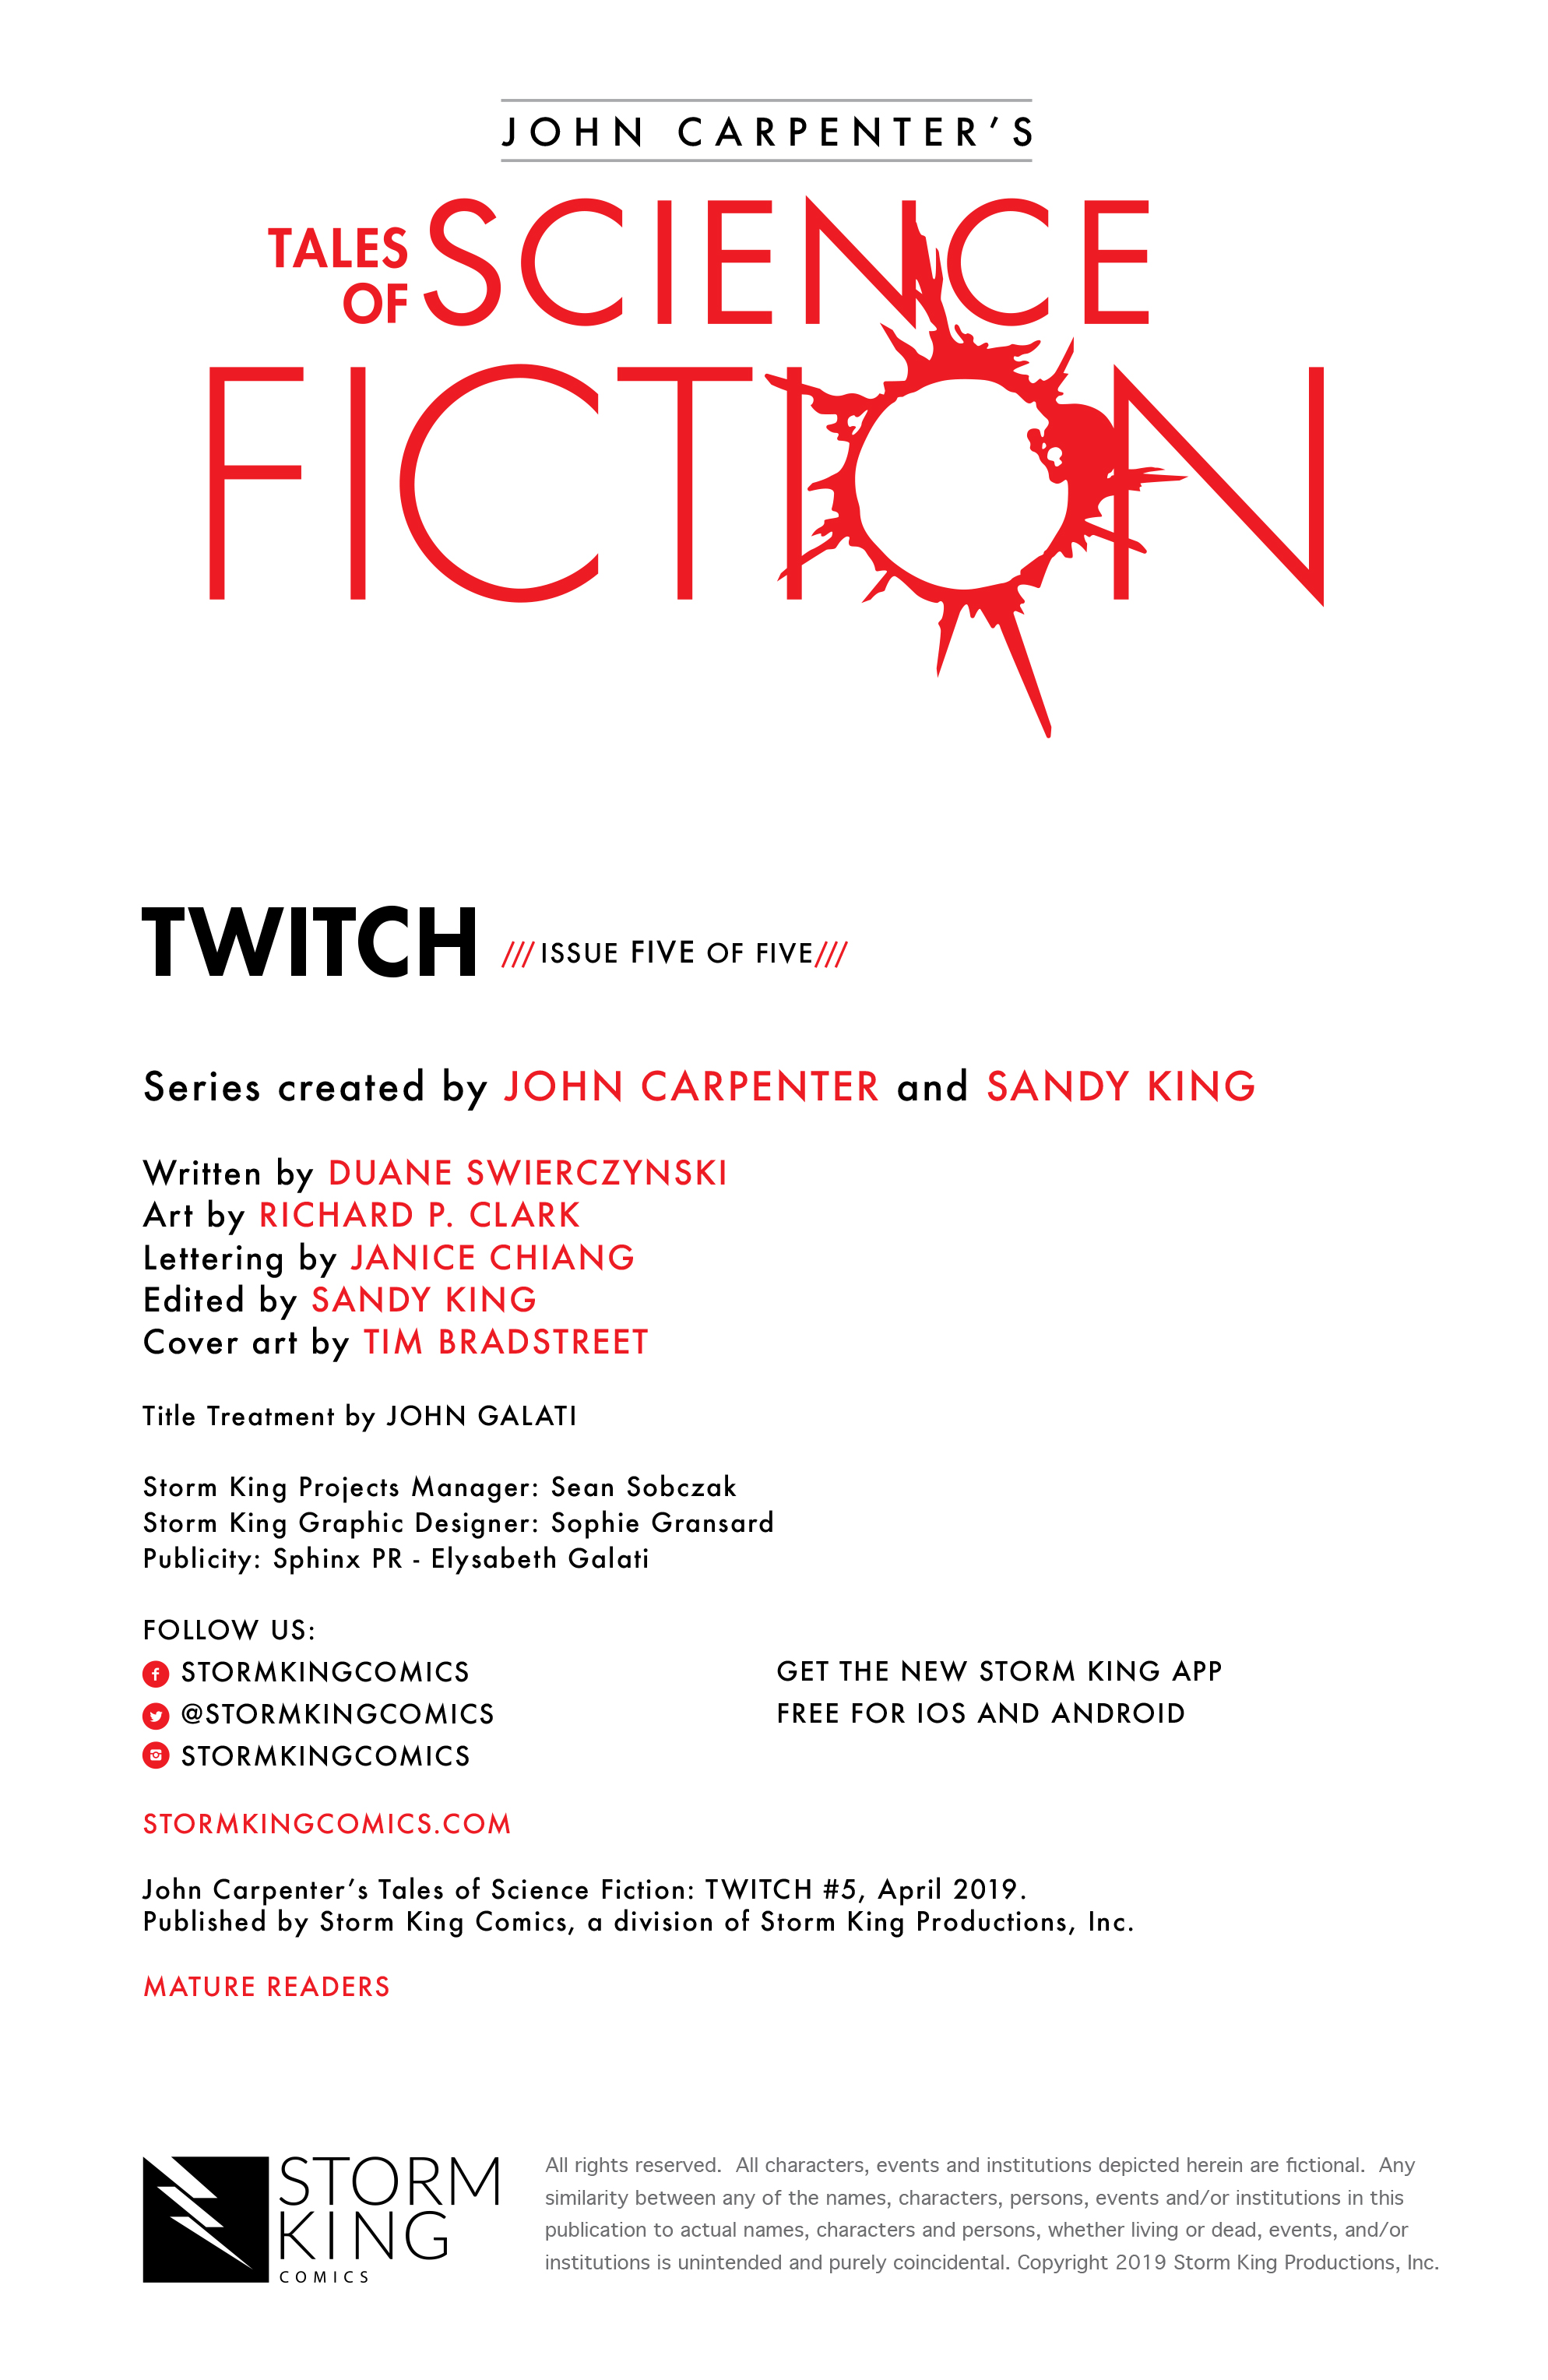 Read online John Carpenter's Tales of Science Fiction: Twitch comic -  Issue #5 - 2